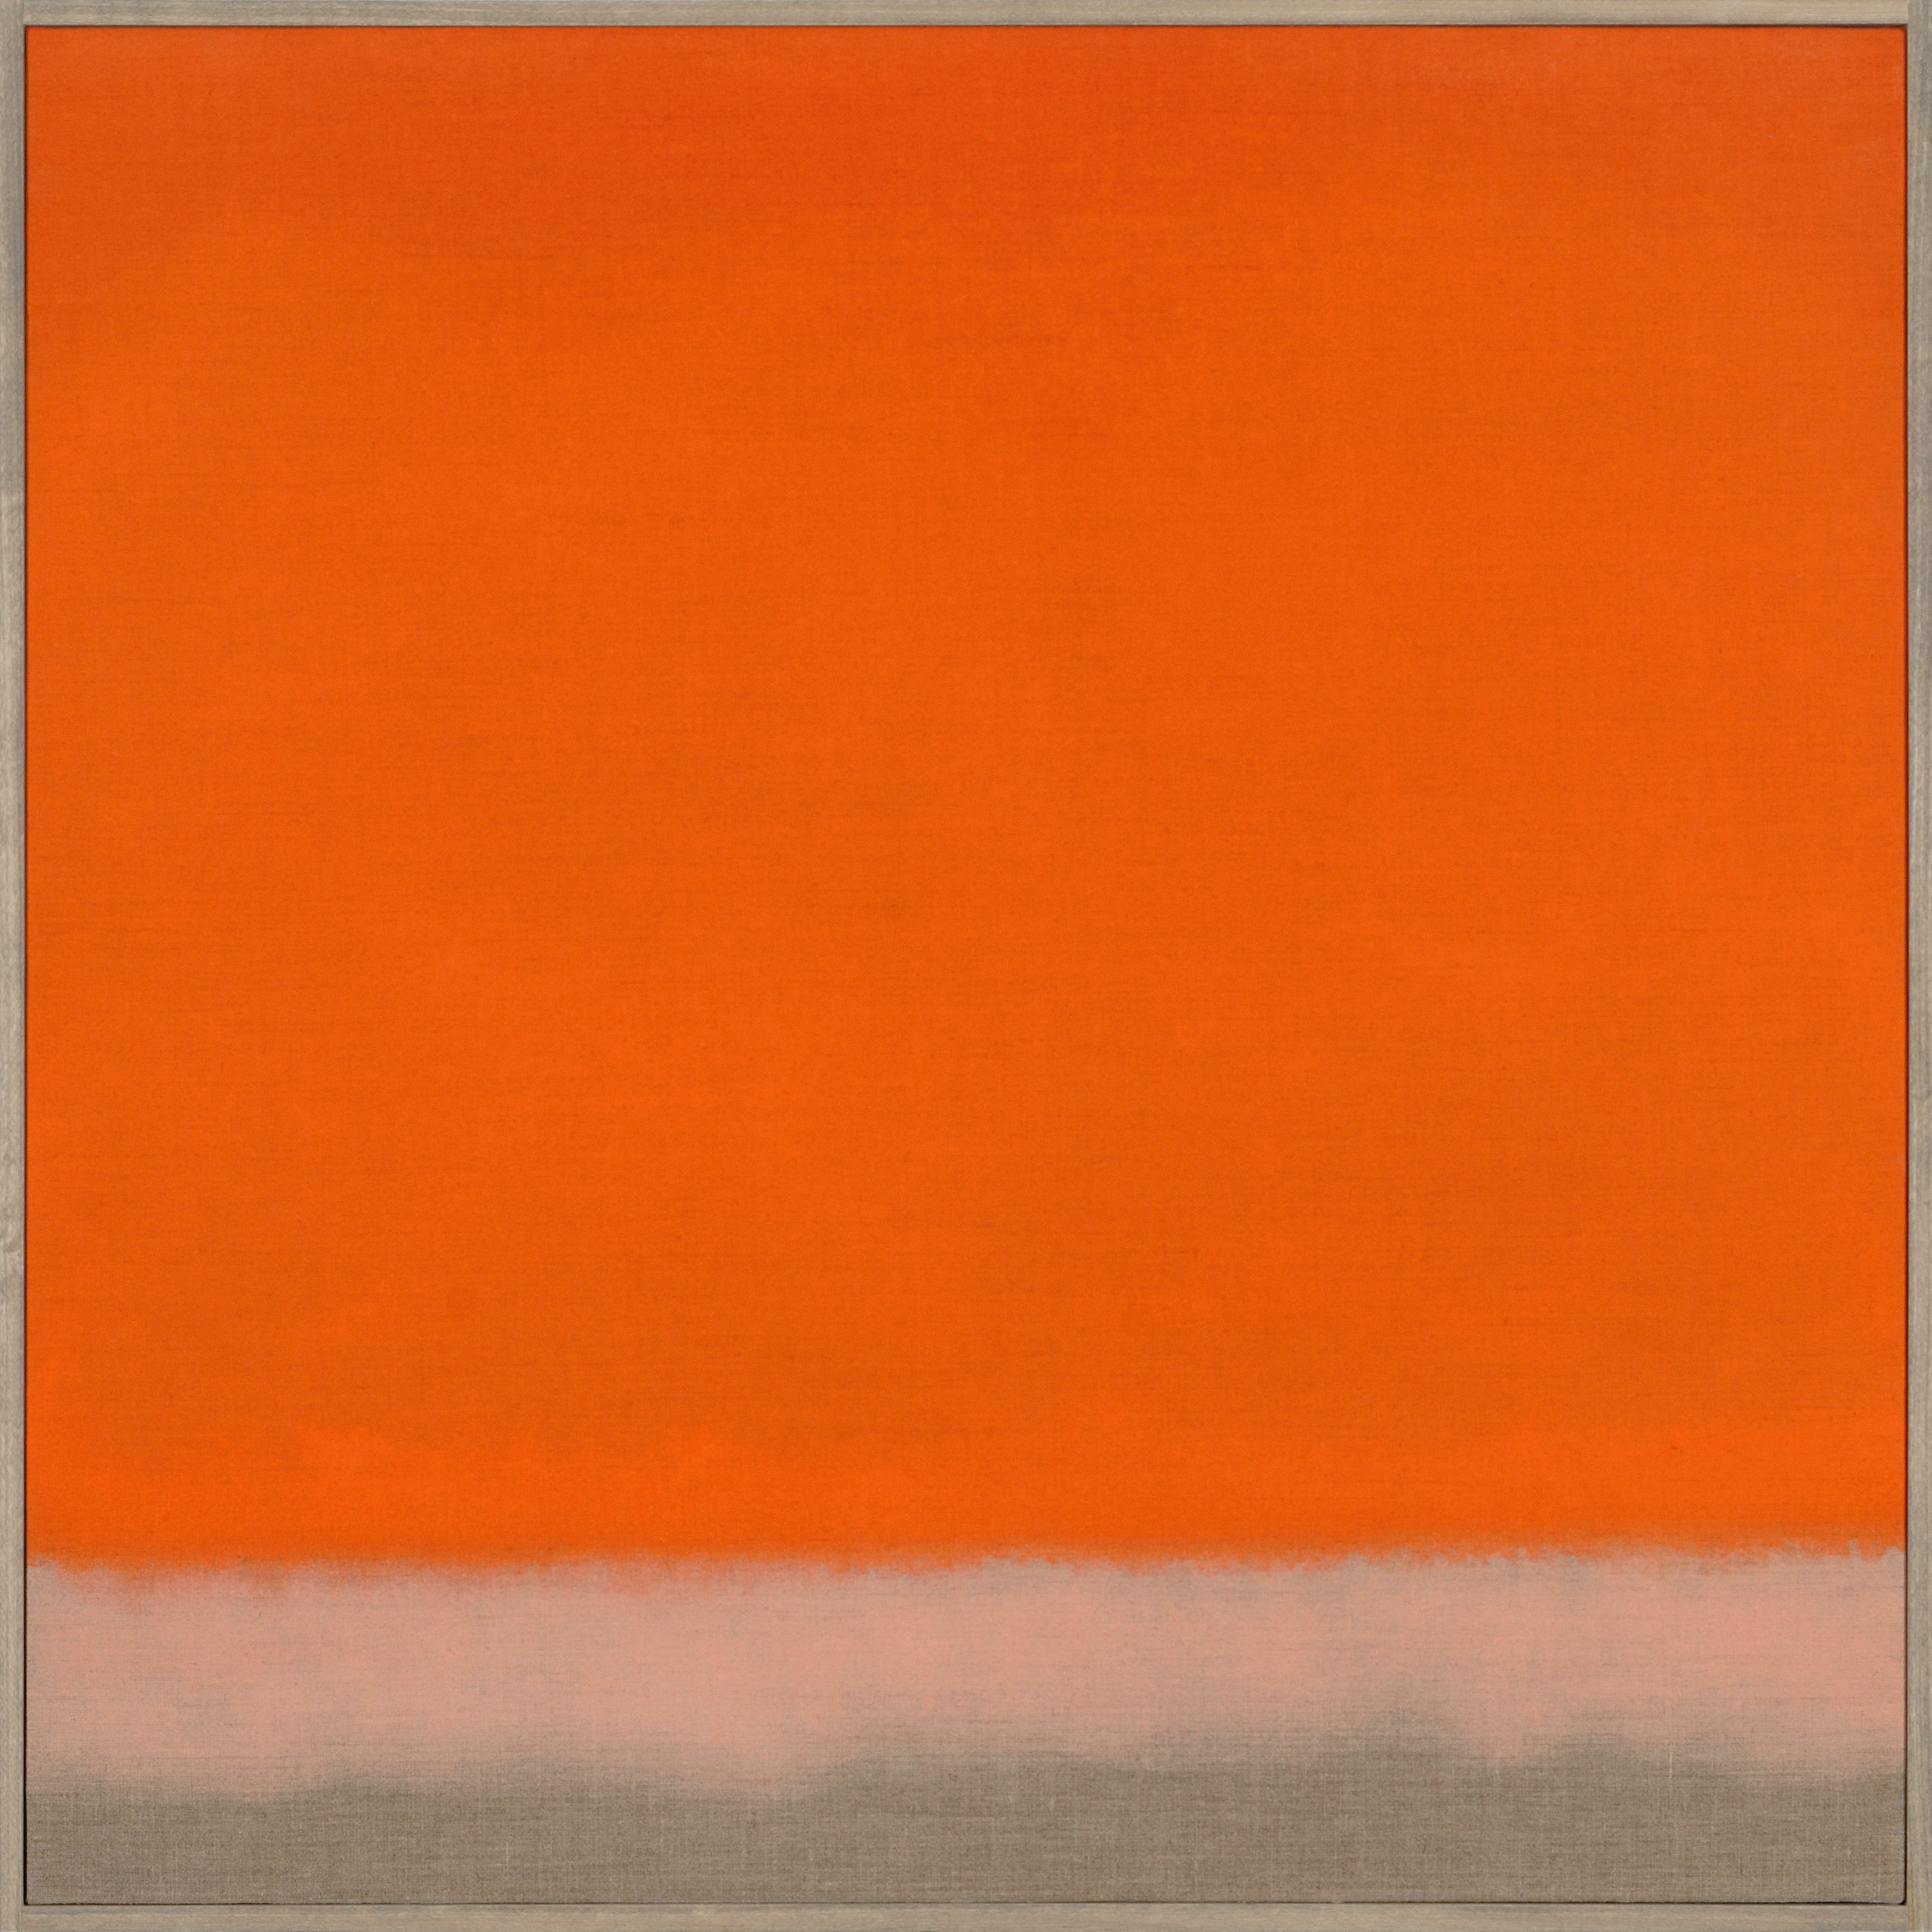  Untitled (Red Orange), 2014. Oil on Linen, 36 x 36 inches. Private Collection. 